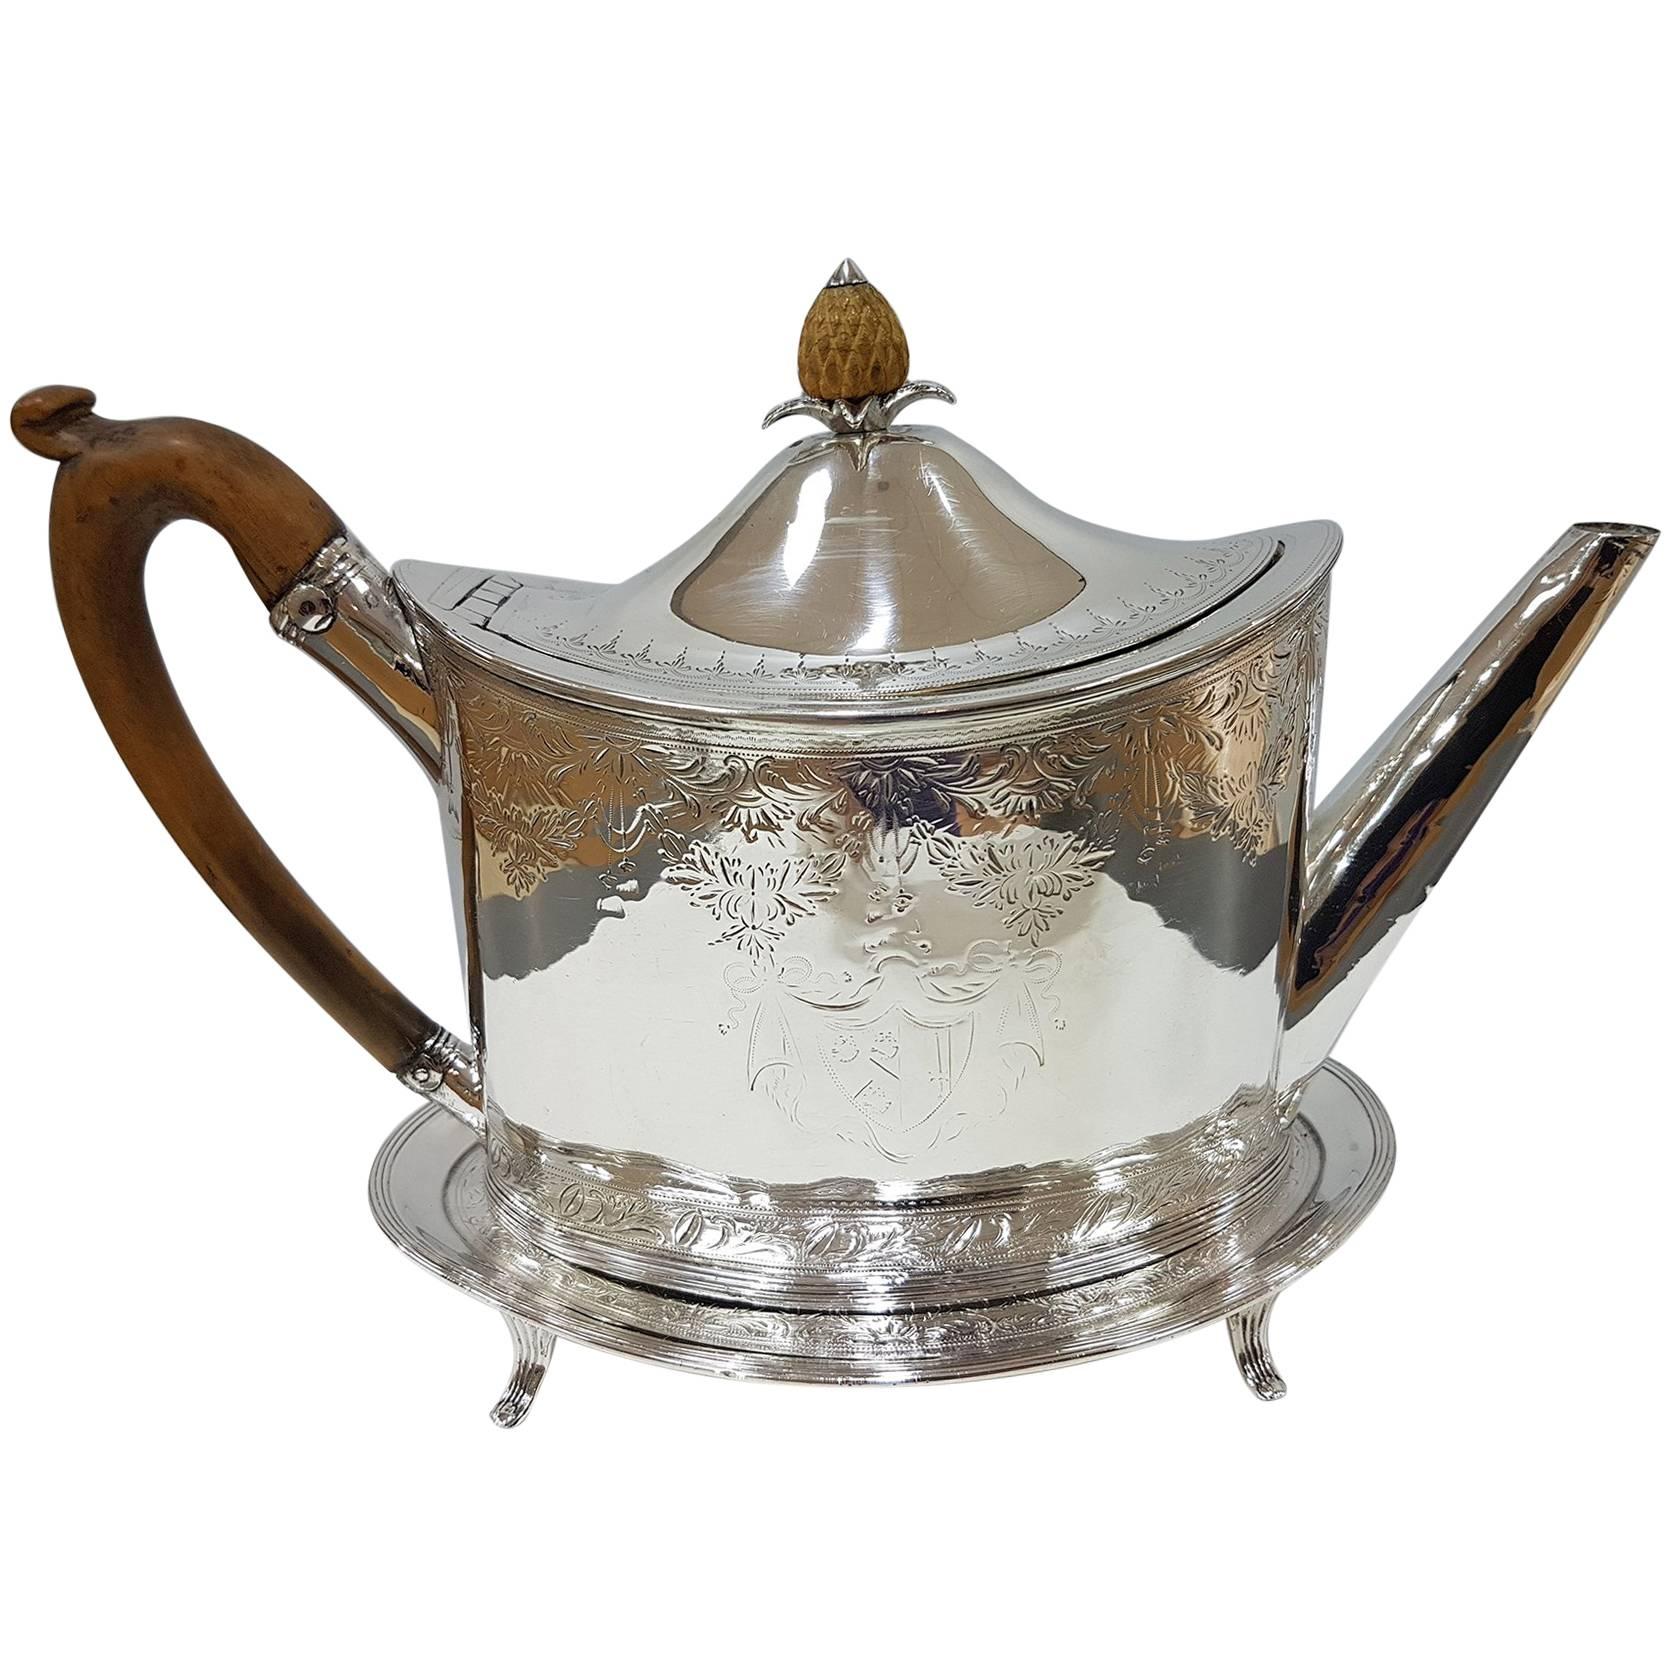 18th Century Sterling Silver Oval Engraved Teapot on Stand by Peter Ann Bateman